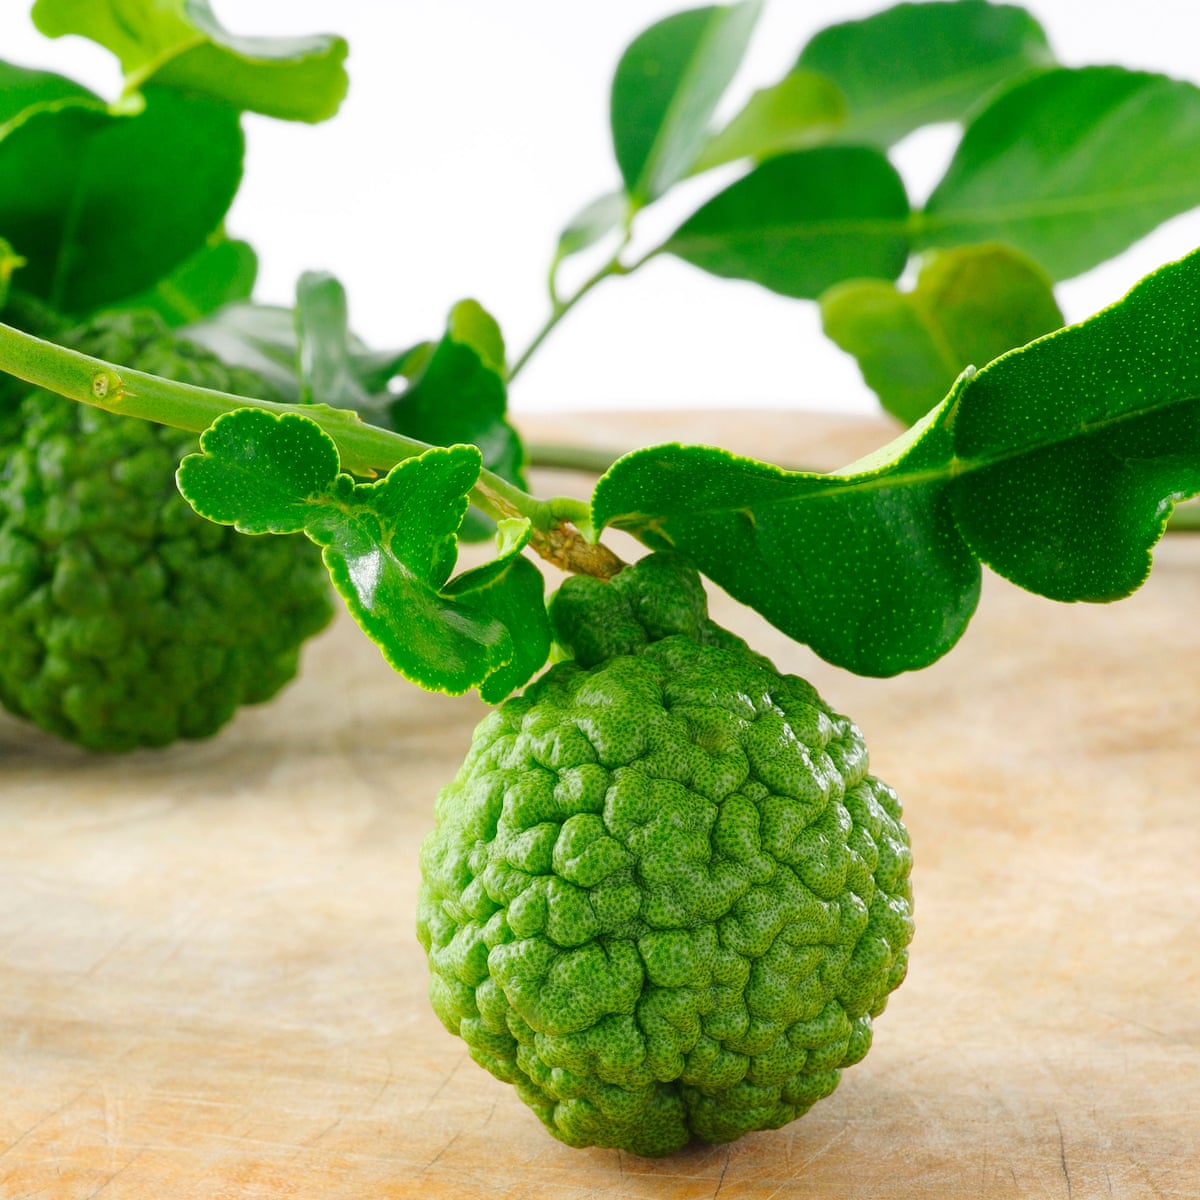 Makrut Lime The Weird And Wonderful Citrus At The Heart Of Thai Flavours Thai Food And Drink The Guardian,Hognose Snake For Sale